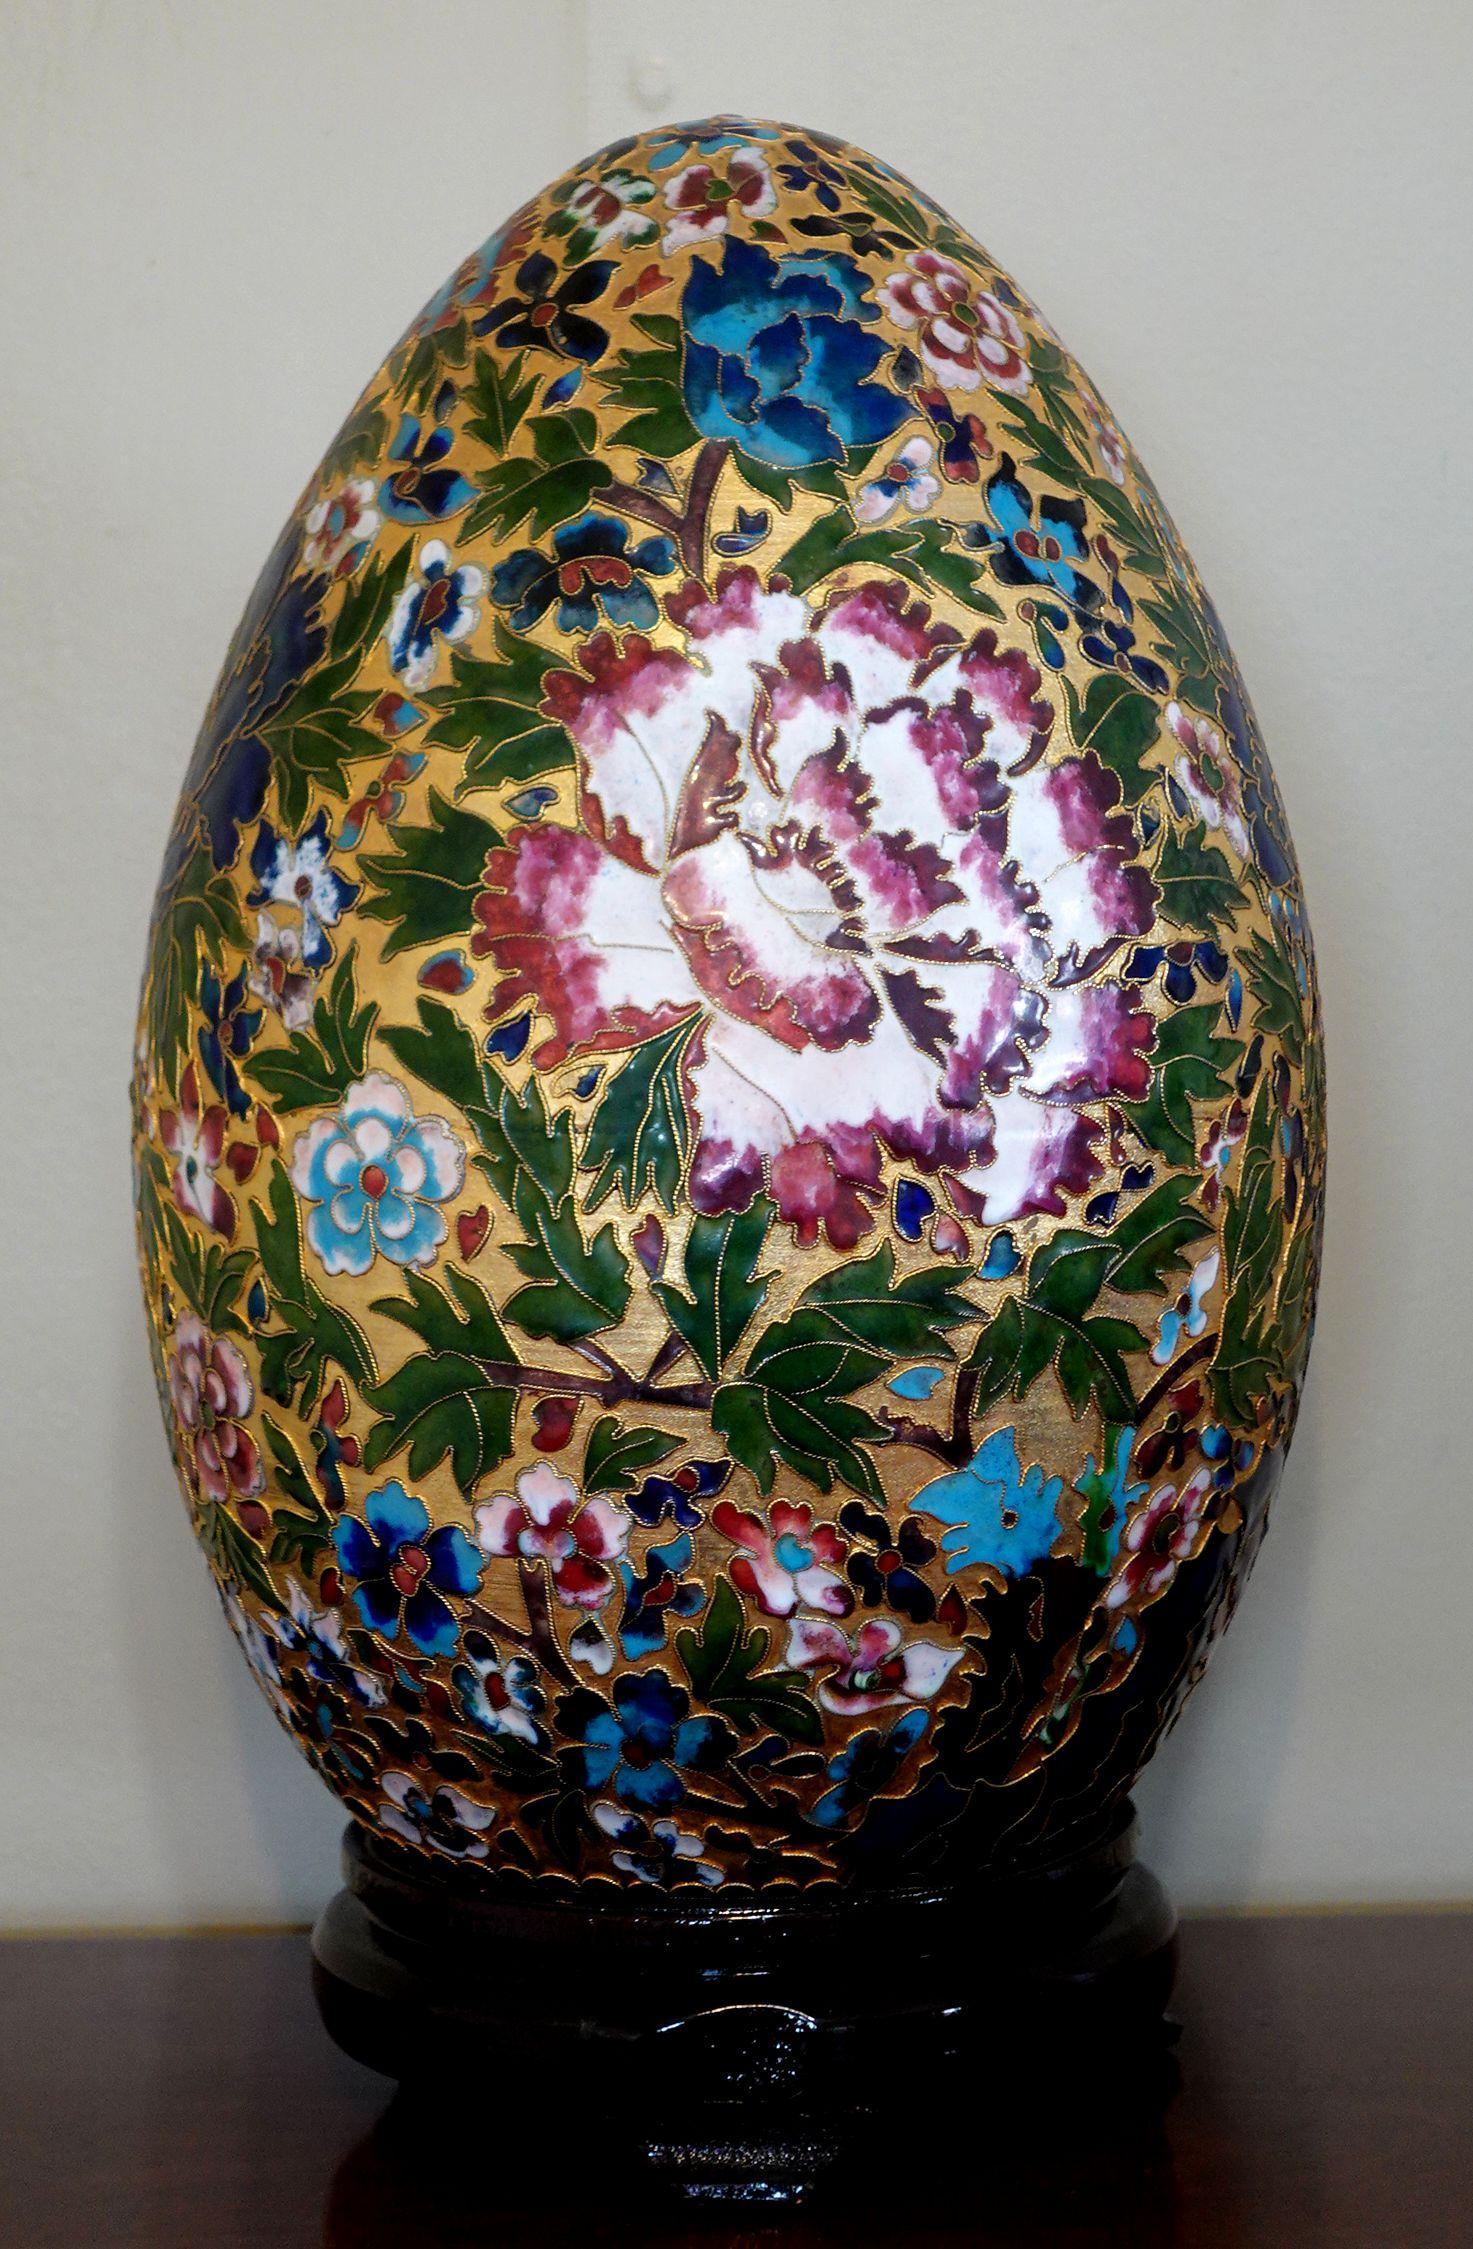 Presenting a very large and beautiful Chinese cloisonné enamel egg with intricated patterns made by hand seating on a wood stand, early 20 century. It's measured about 16.5